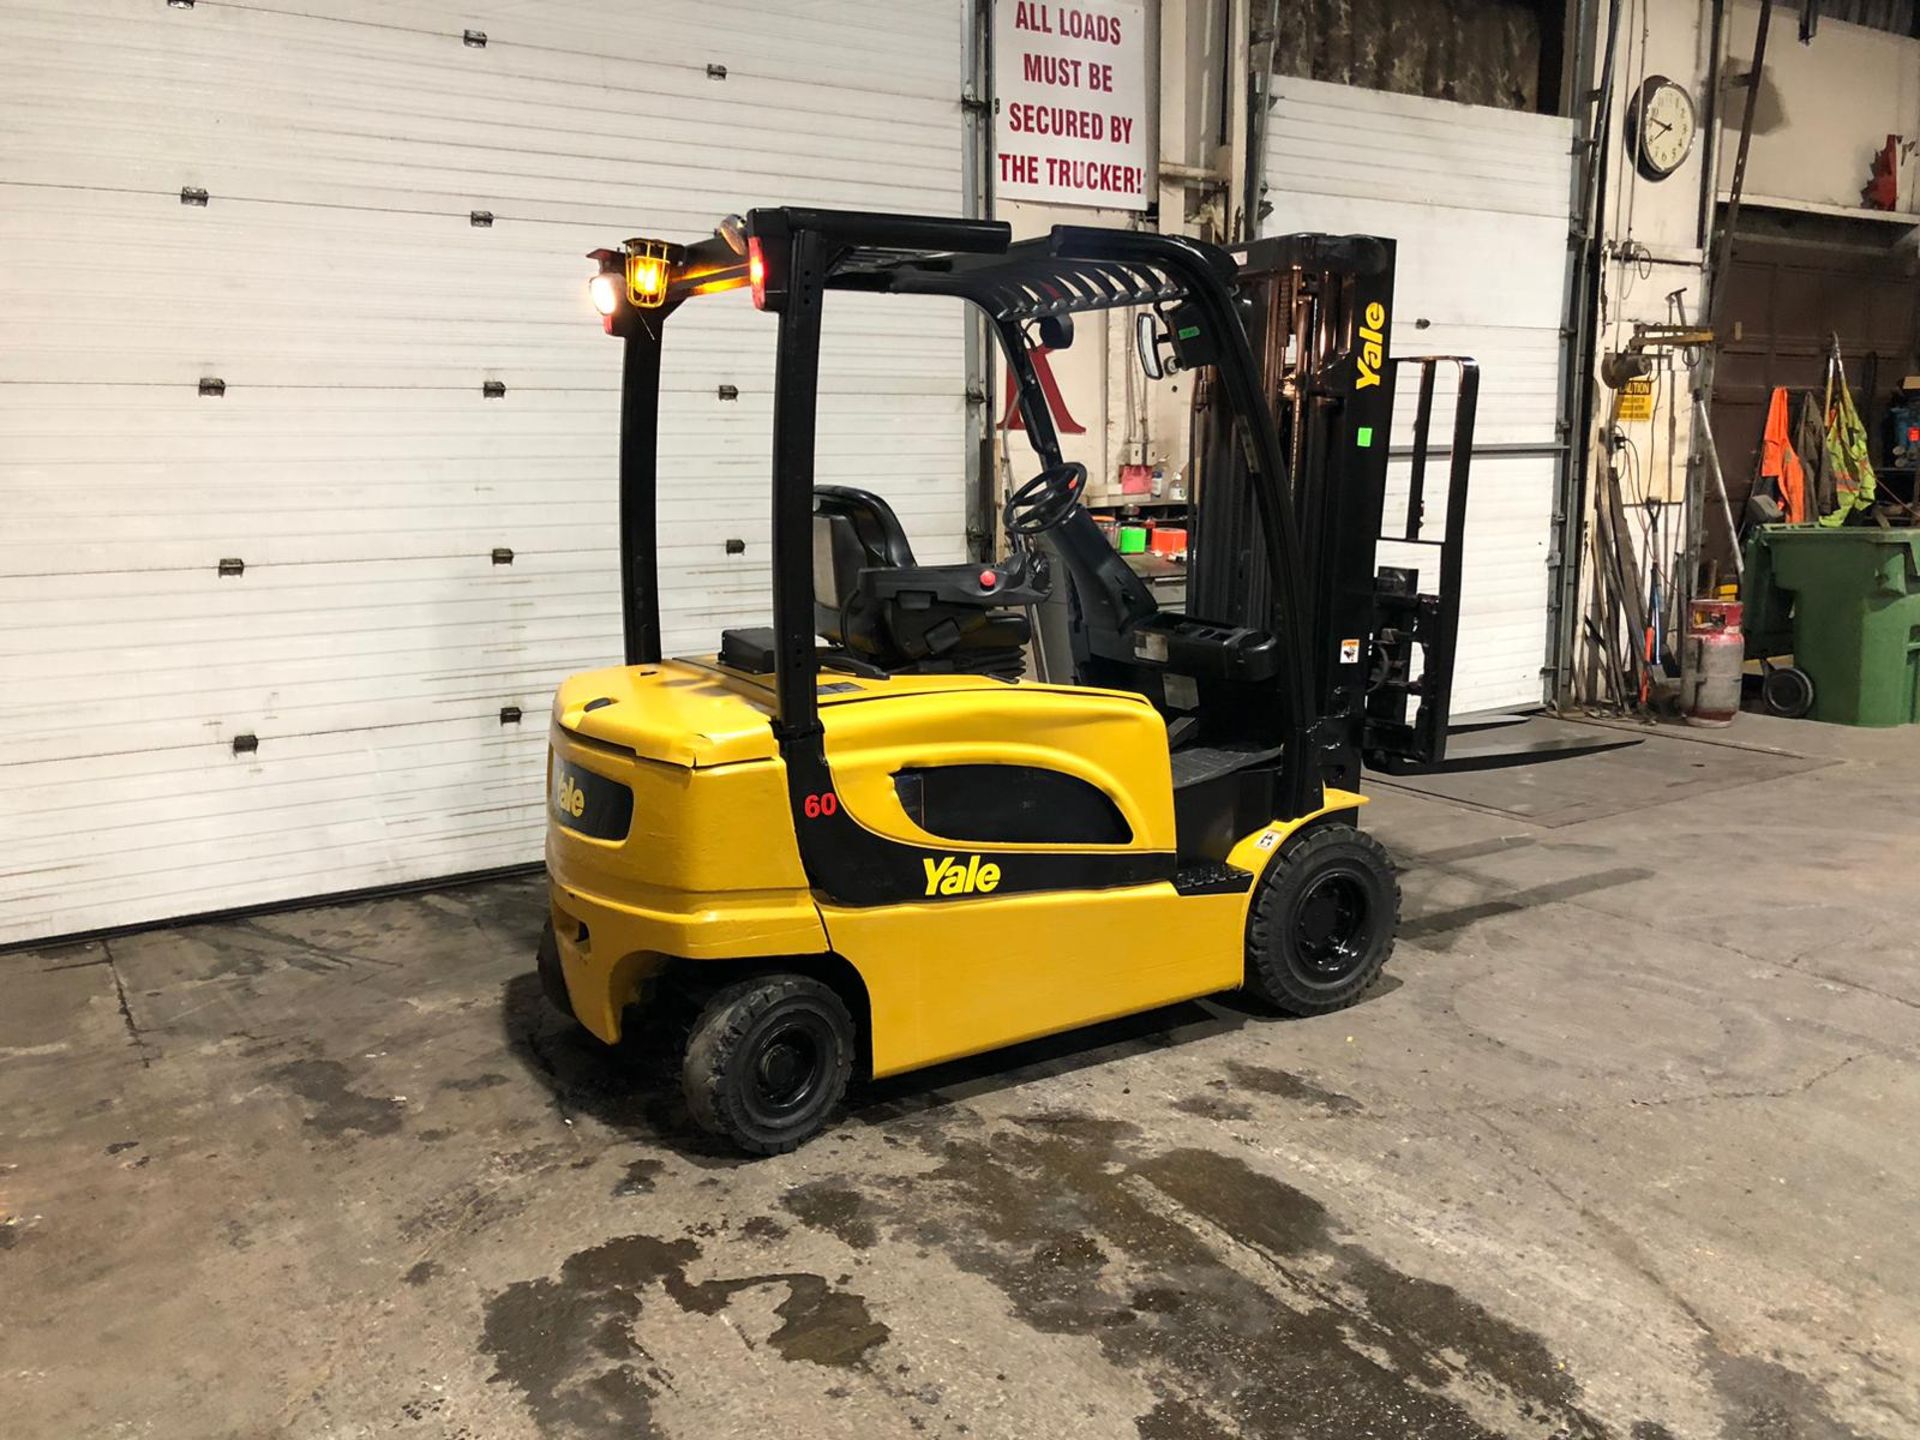 MINT 2019 Yale 6,000lbs Capacity Forklift INDOOR / OUTDOOR Electric 80V with Sideshift - Image 2 of 6